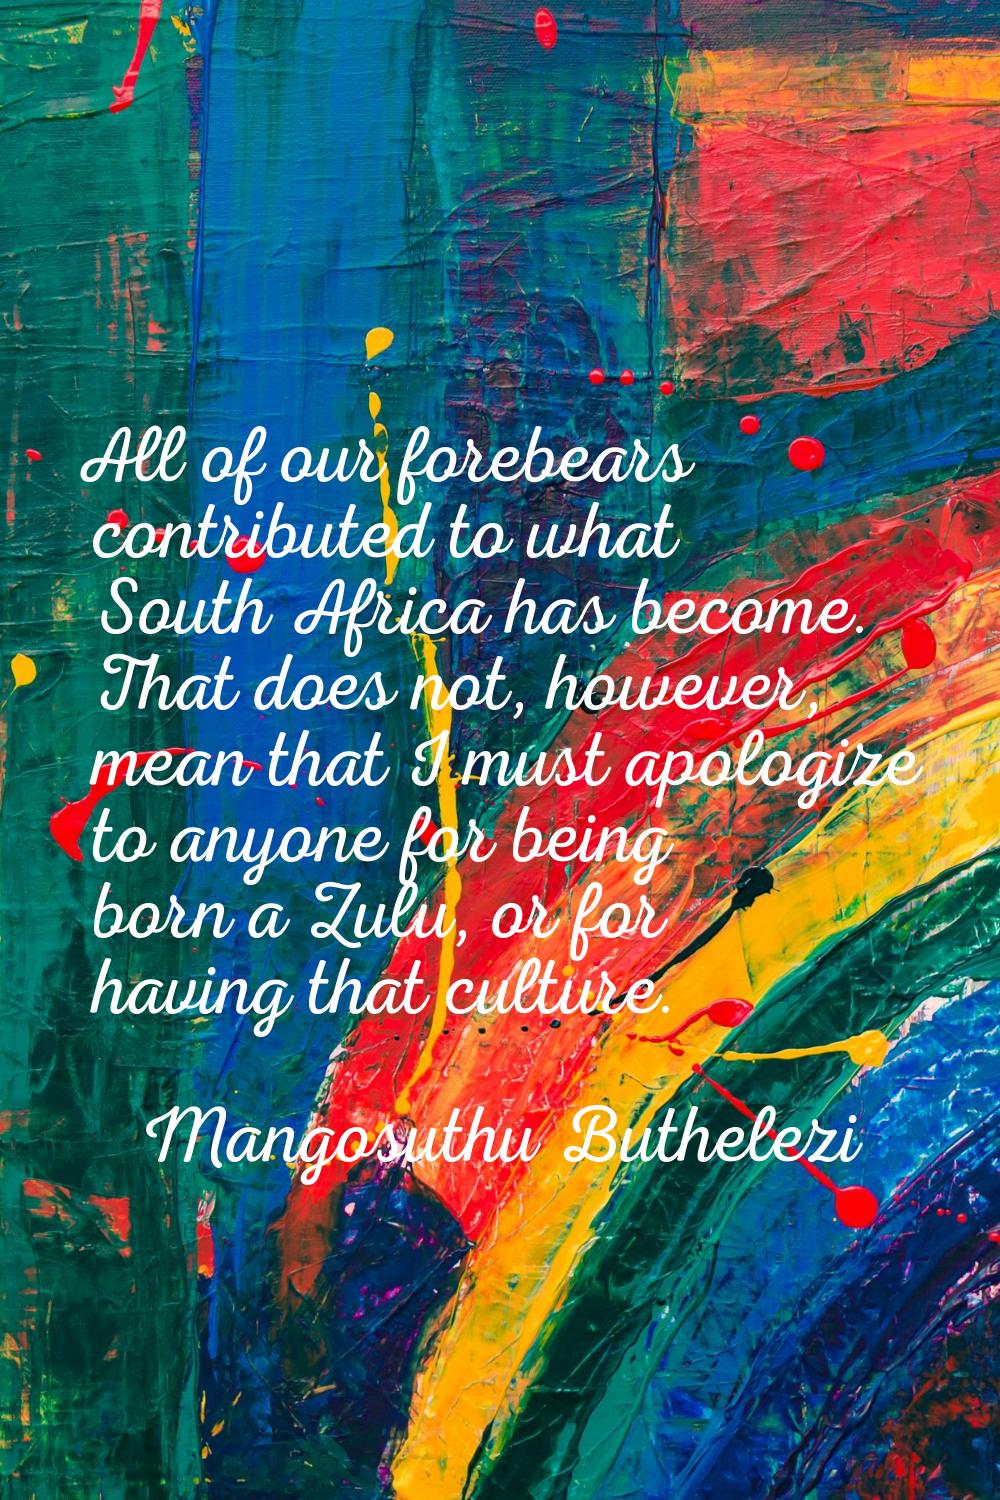 All of our forebears contributed to what South Africa has become. That does not, however, mean that